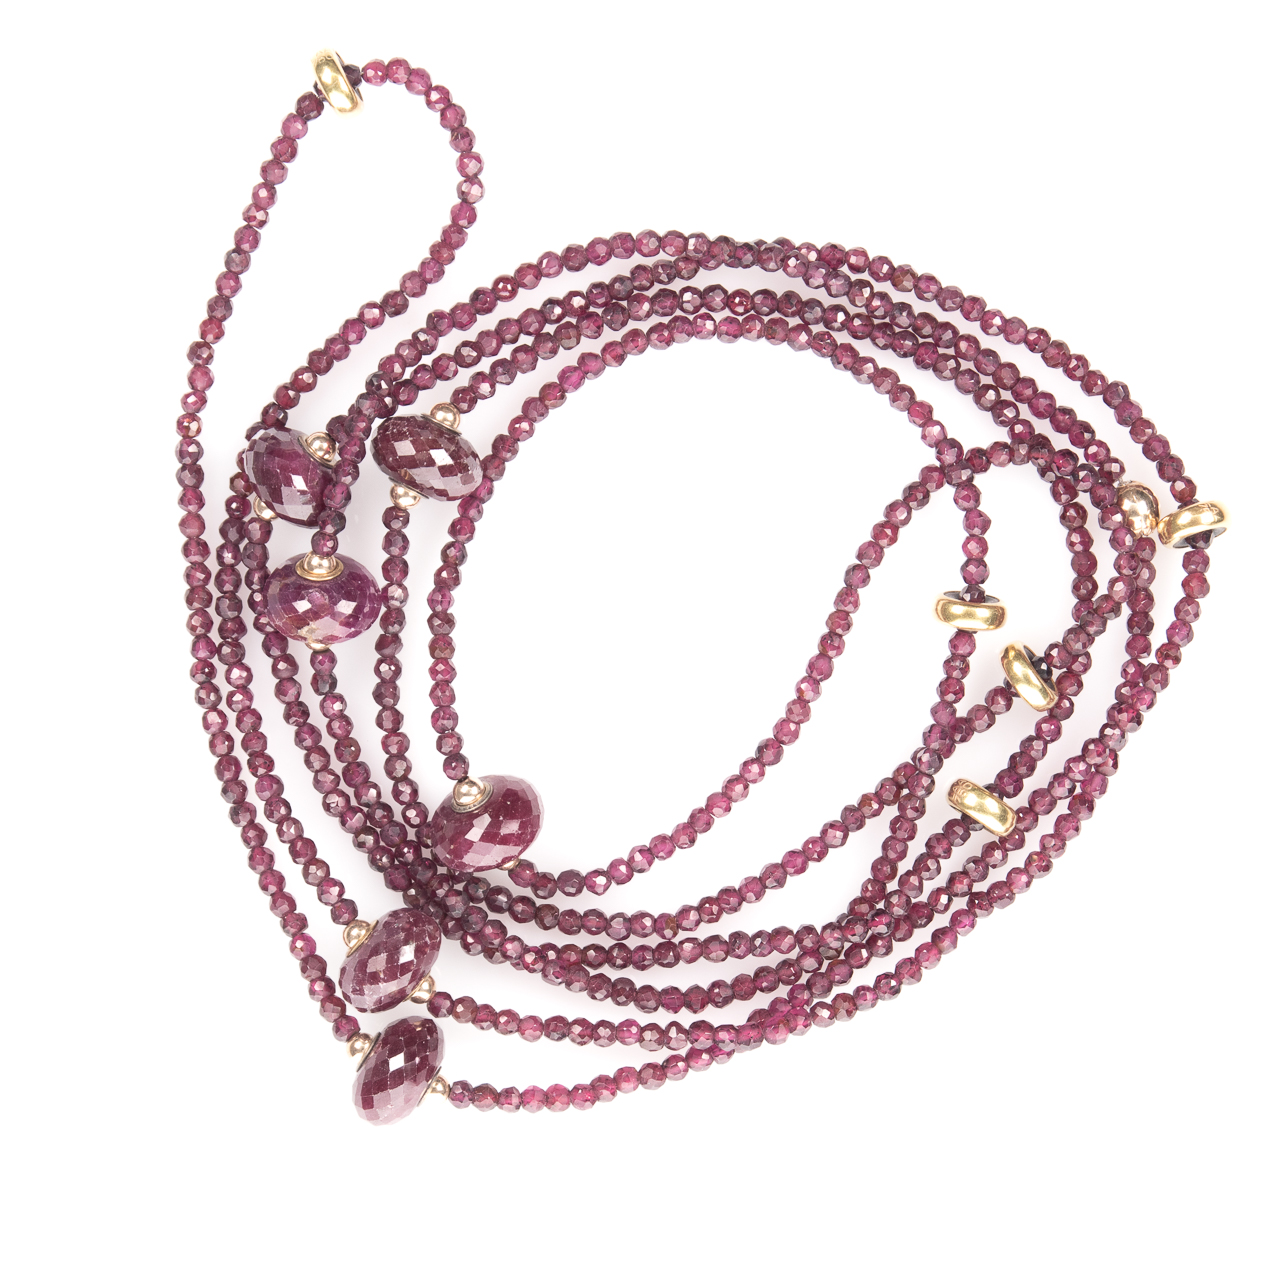 18ct Gold 300ct Ruby Necklace - Image 2 of 3